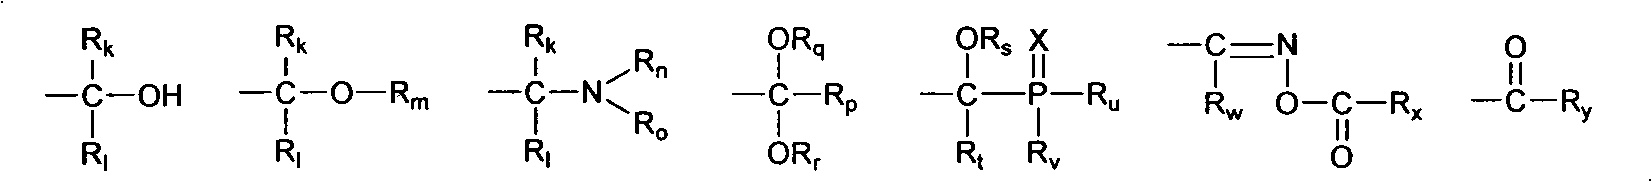 Soluble oxime ester and aromatic ketone photo polymerization initiator